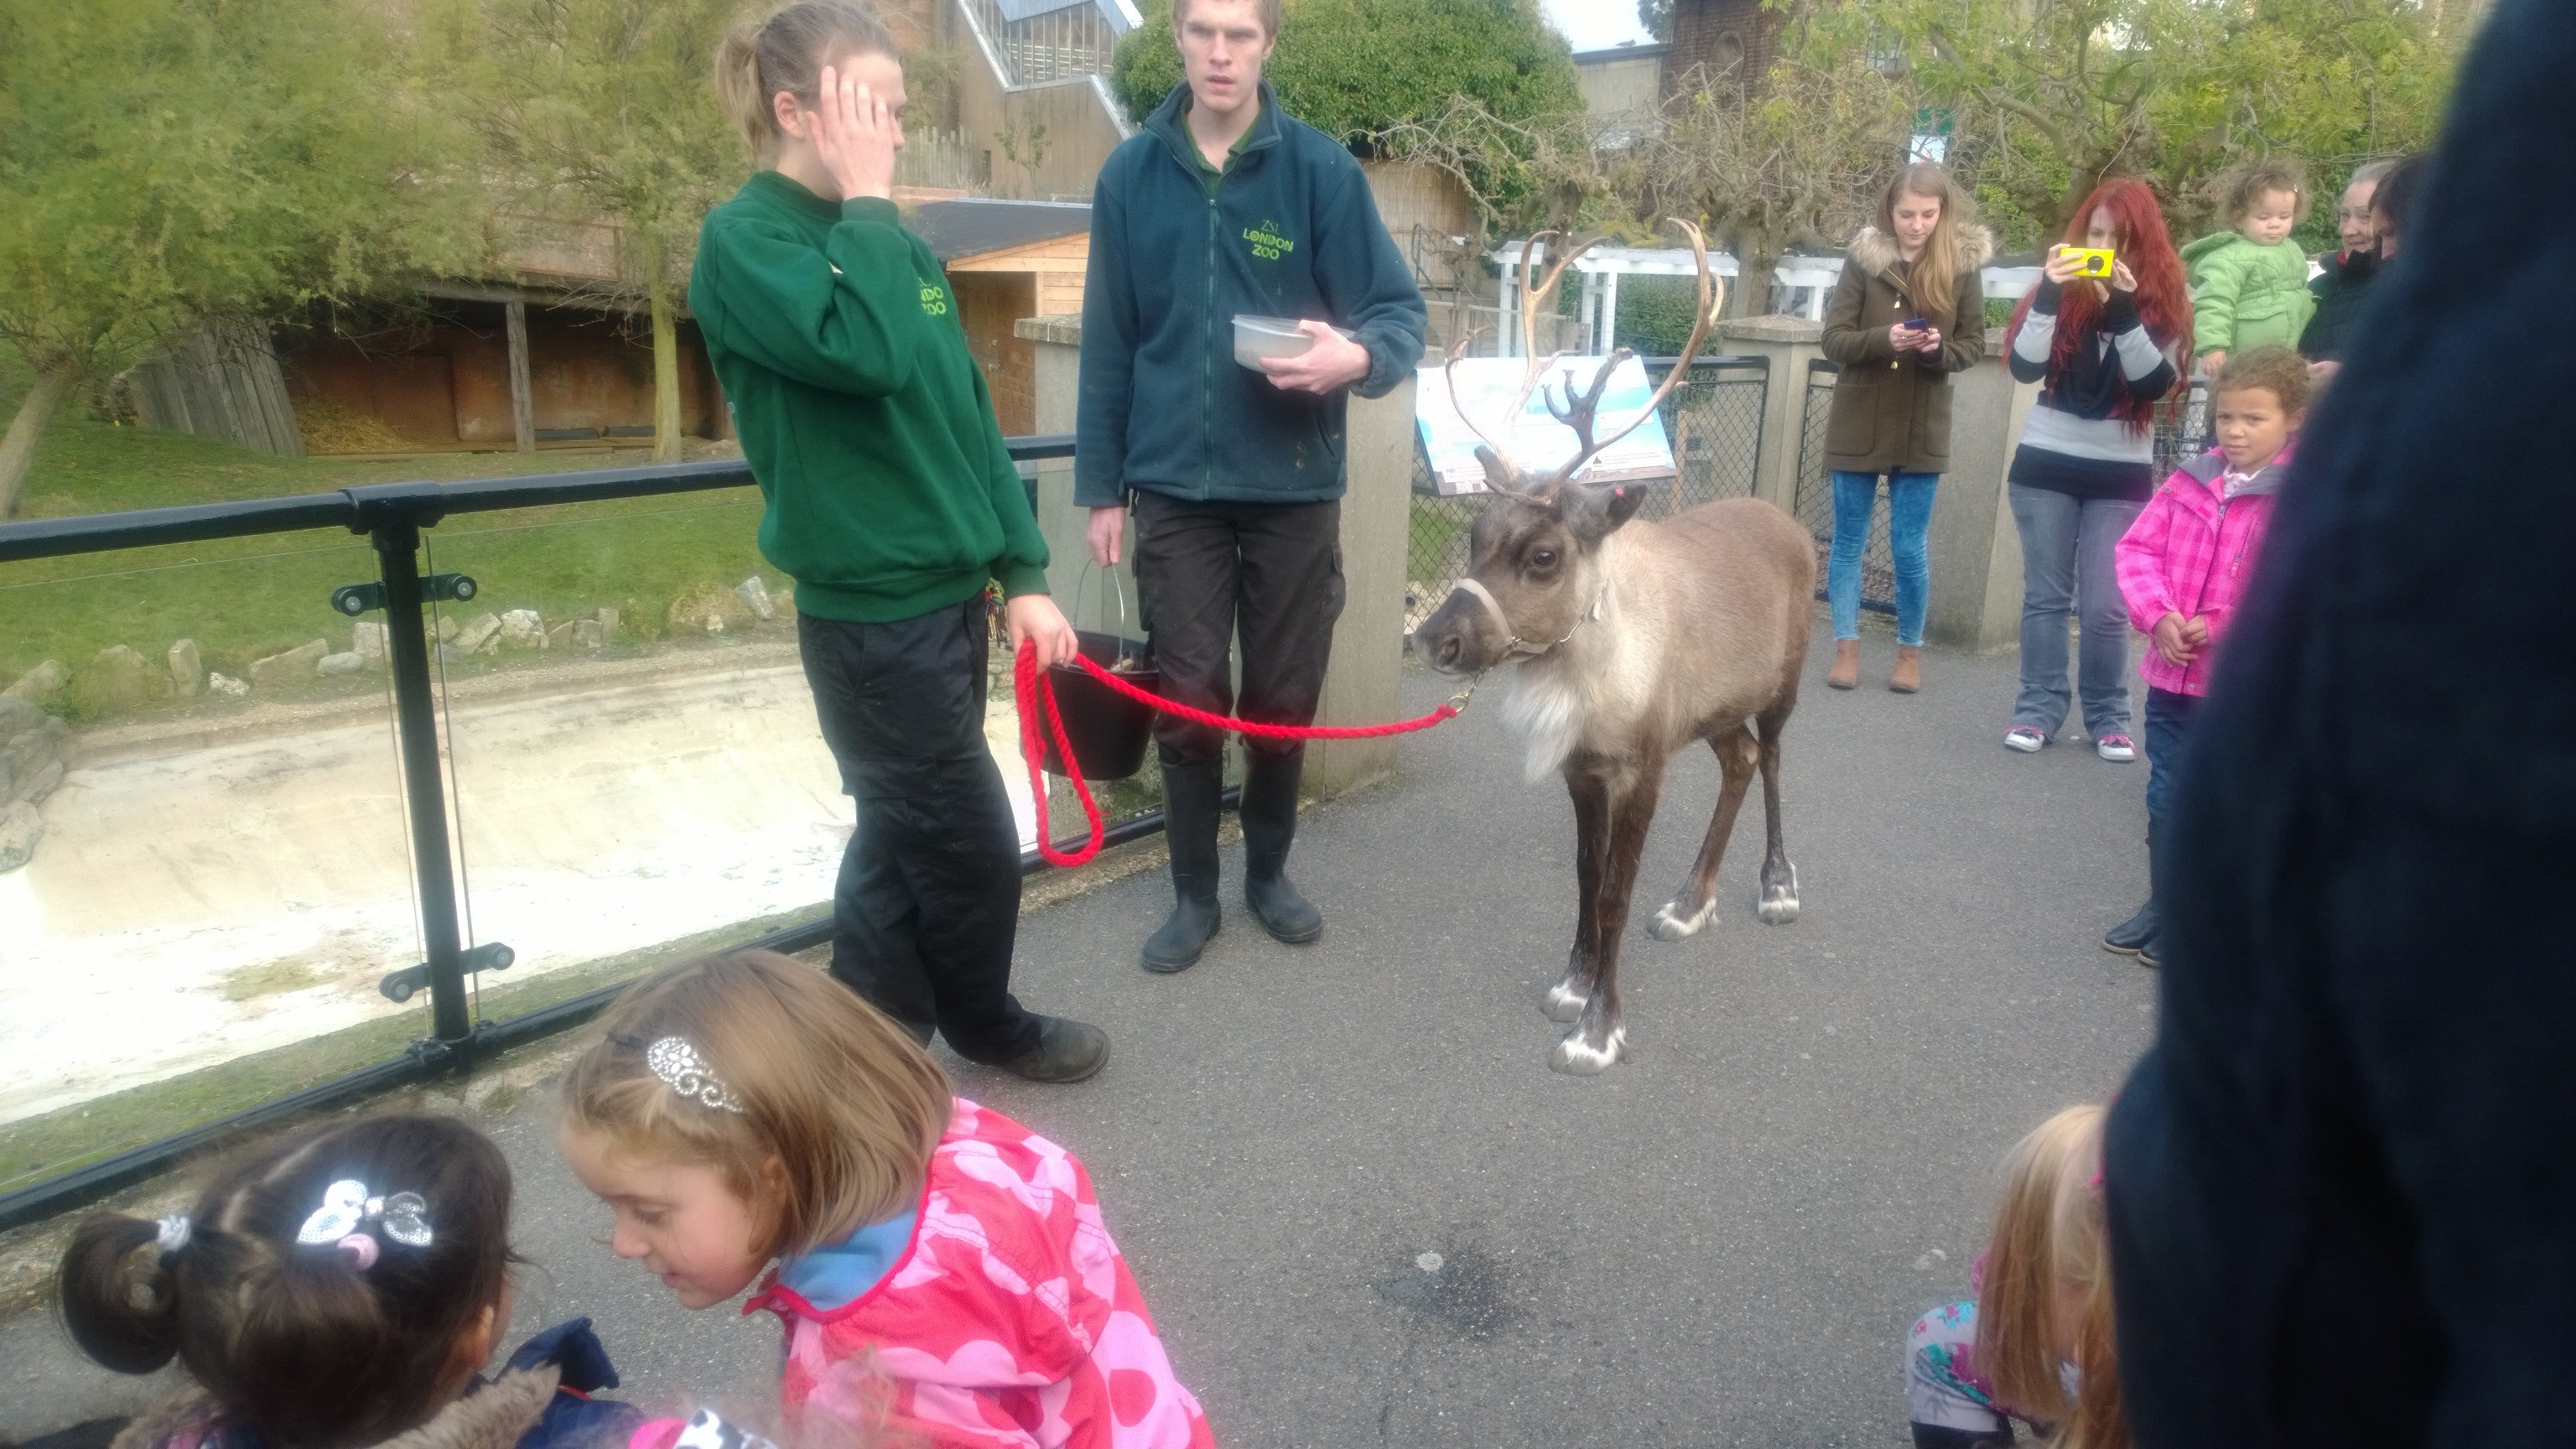 The reindeer came out to play at Londono Zoo